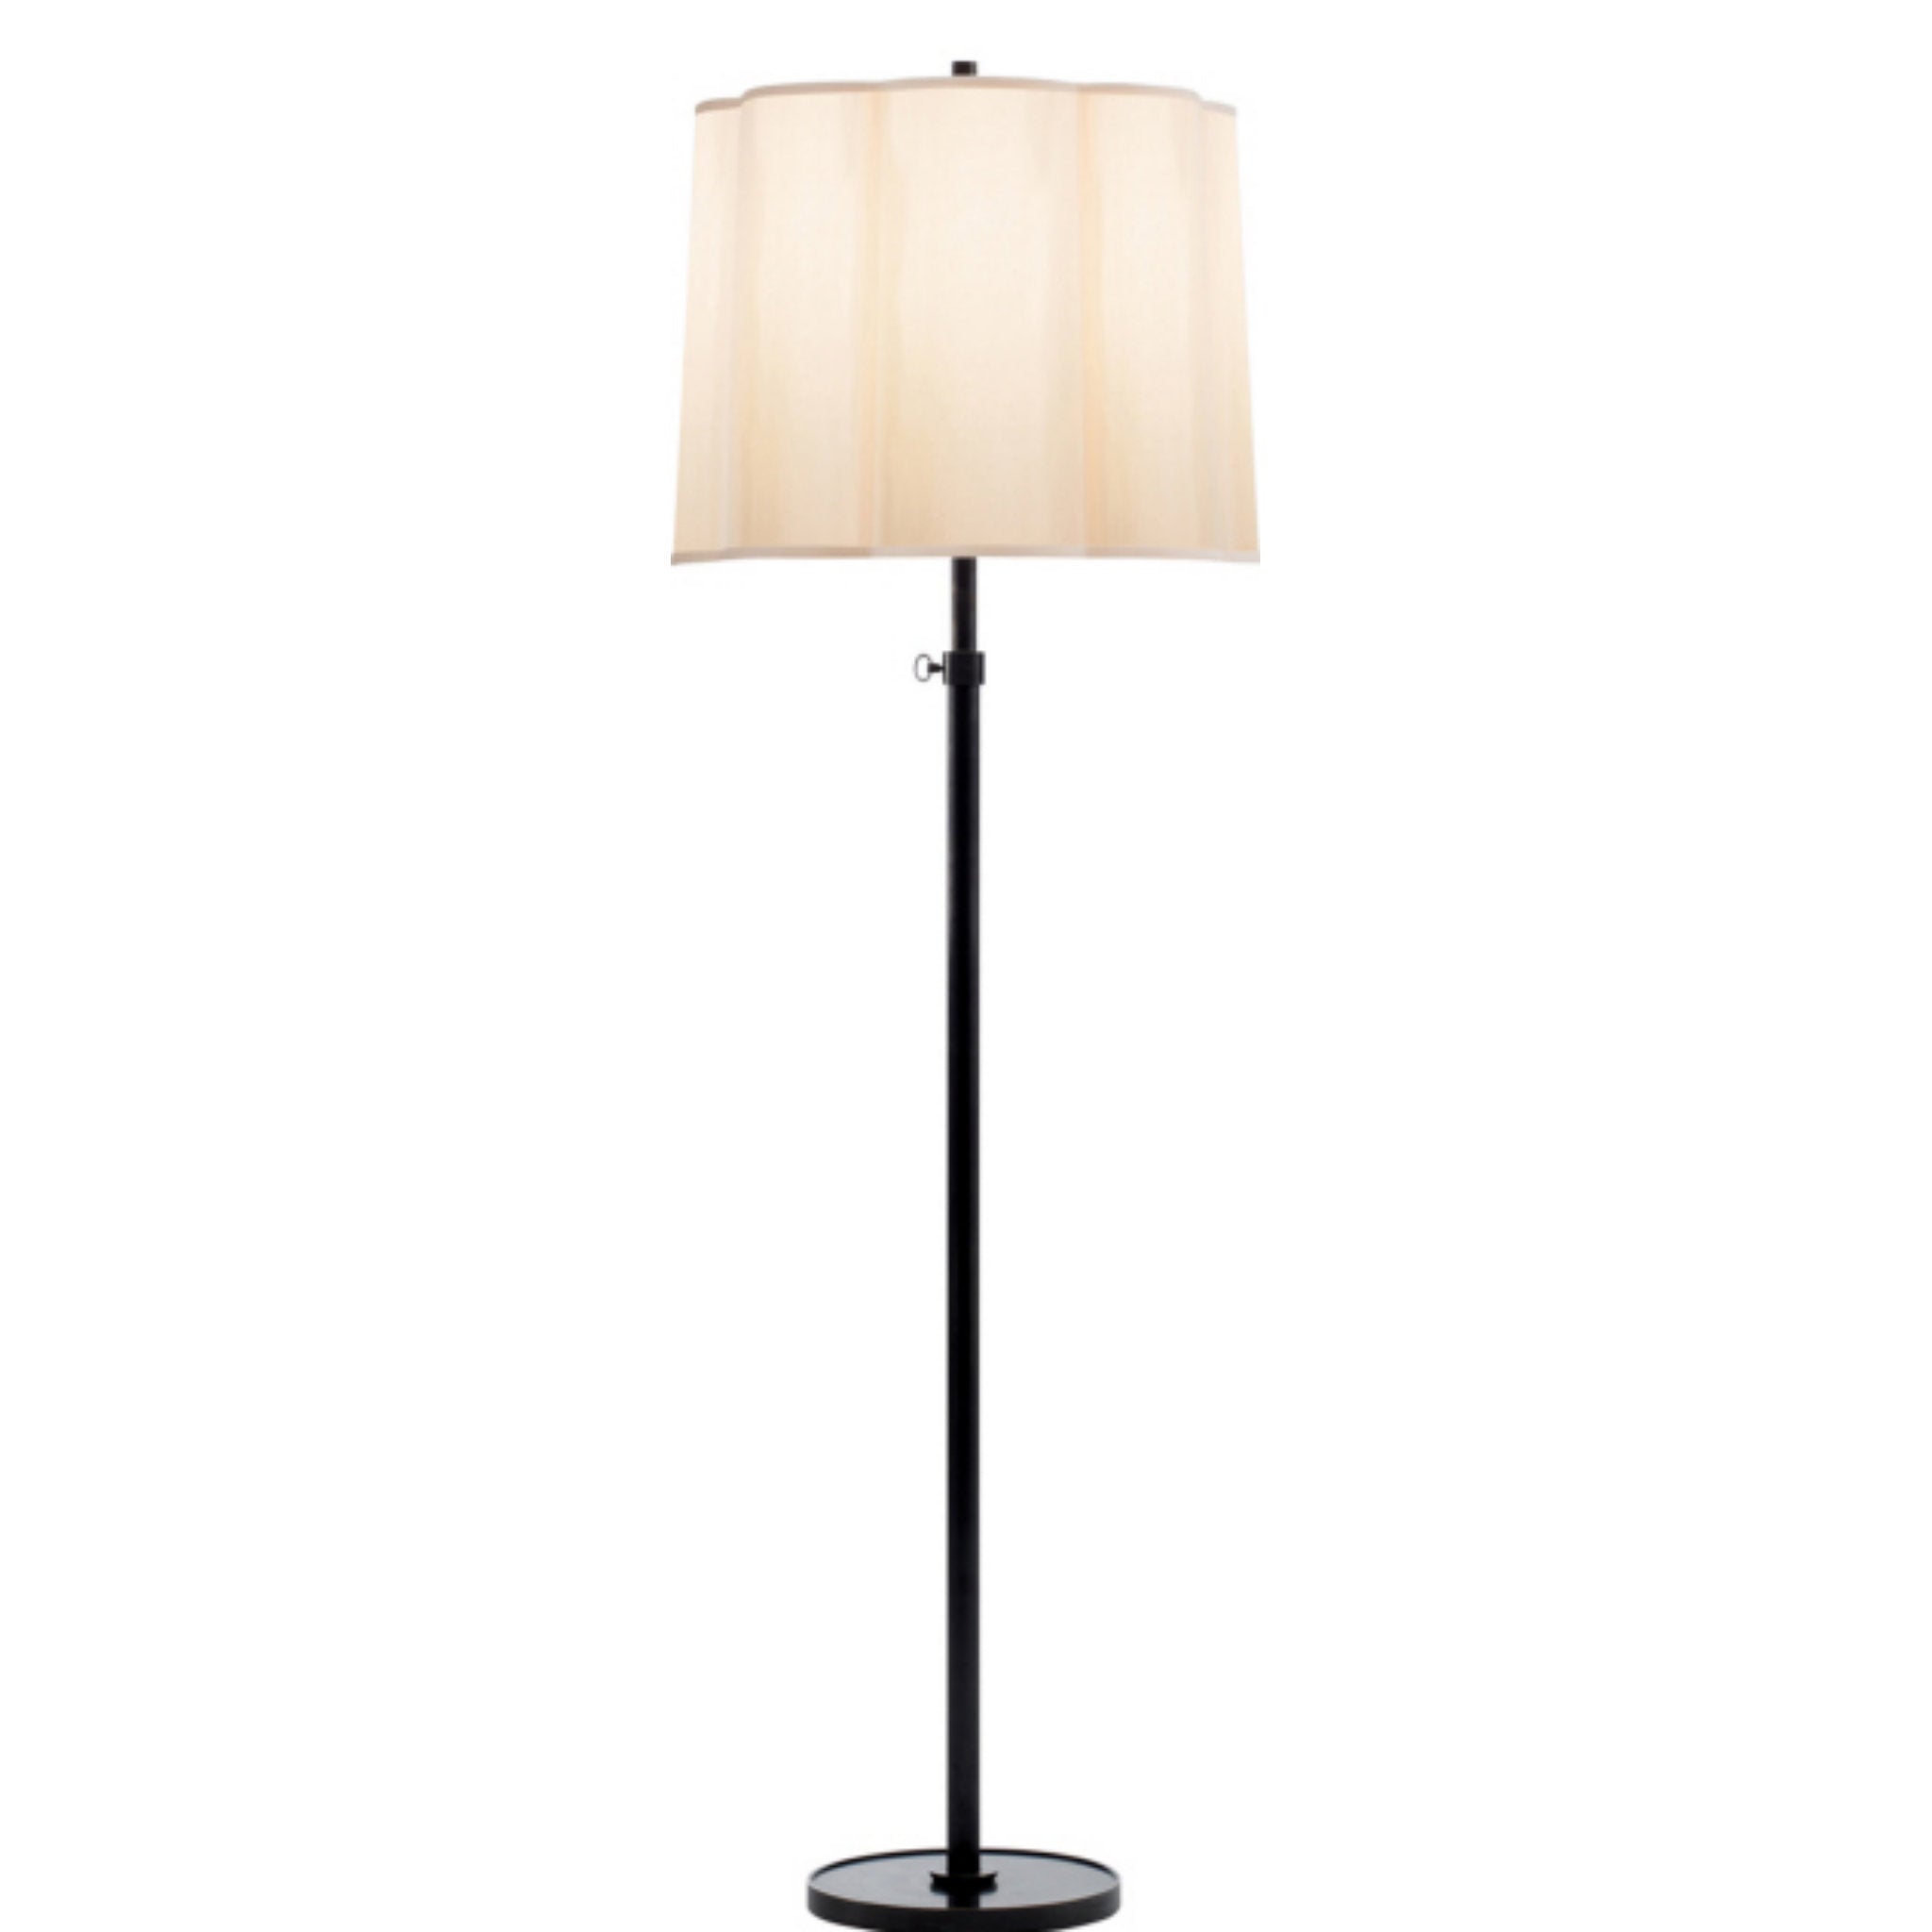 Barbara Barry Simple Floor Lamp in Bronze with Silk Scalloped Shade